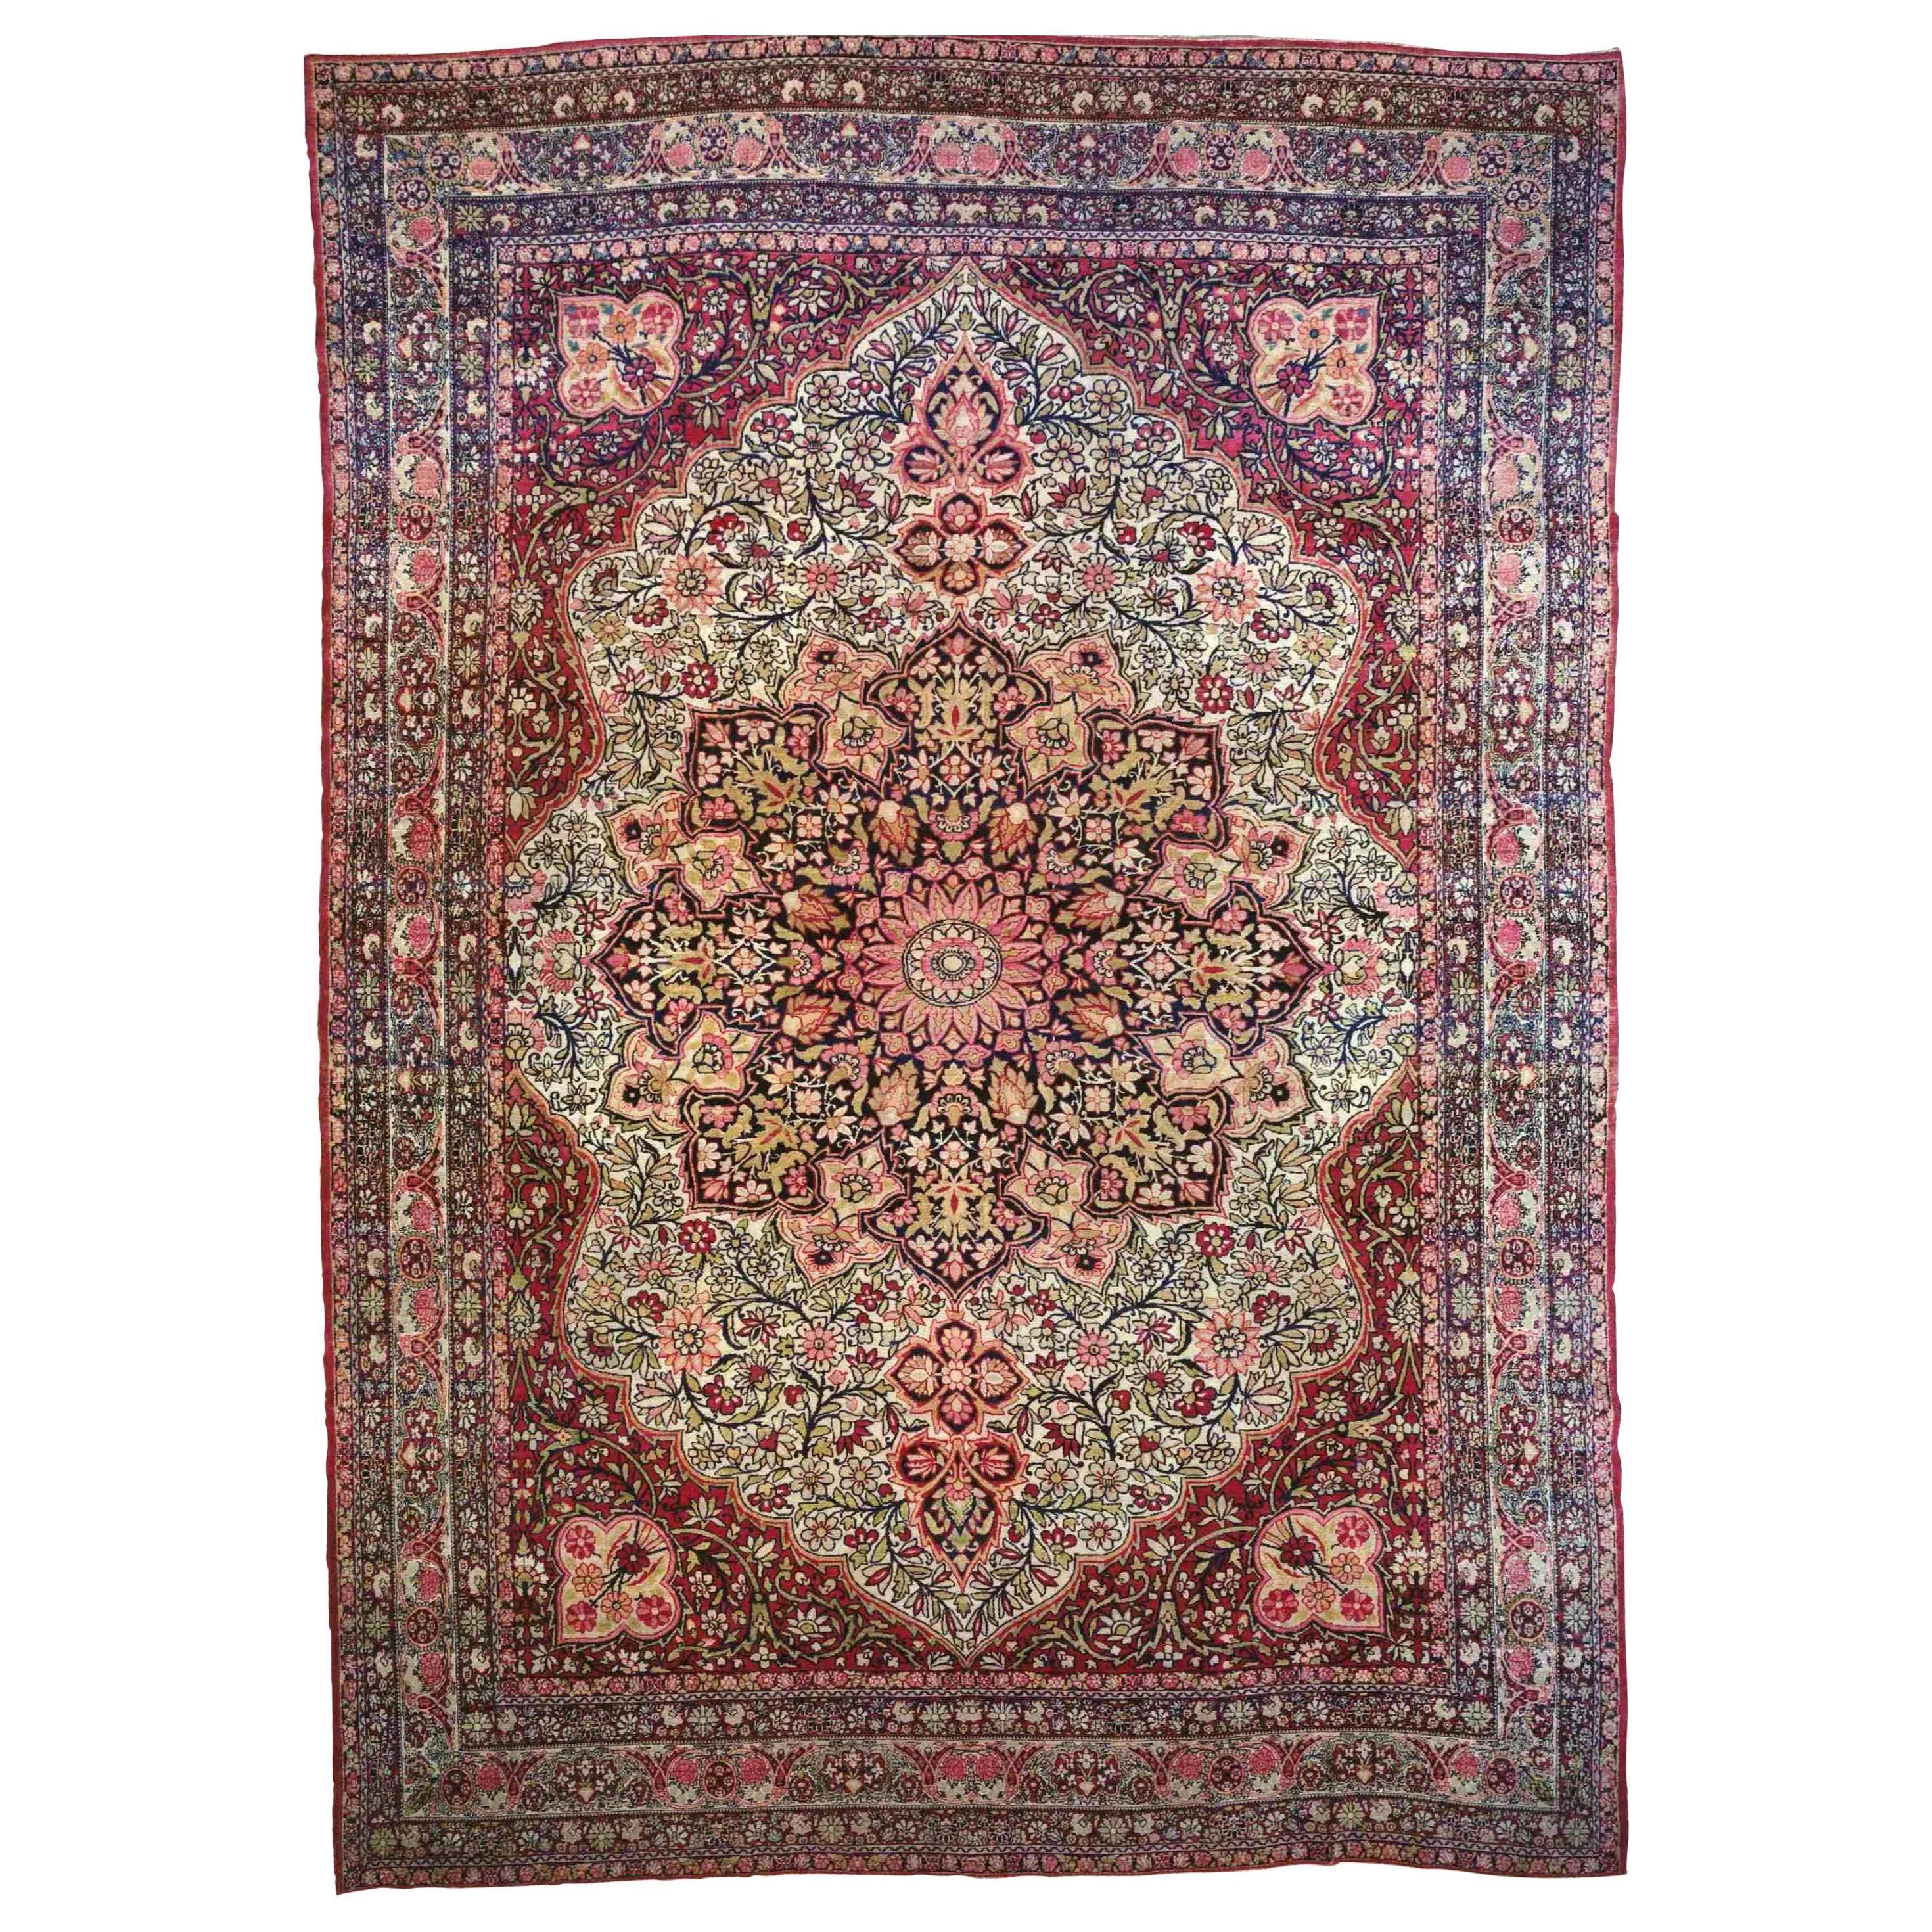 An antique Persian Lavar Kerman carpet, circa 1890, size 13'4 x 9'4.  This lovely hand-knotted wool carpet features a very fine weave, with short pile, and a beautiful medallion design.  The intricate medallion is in a star shape at the center of